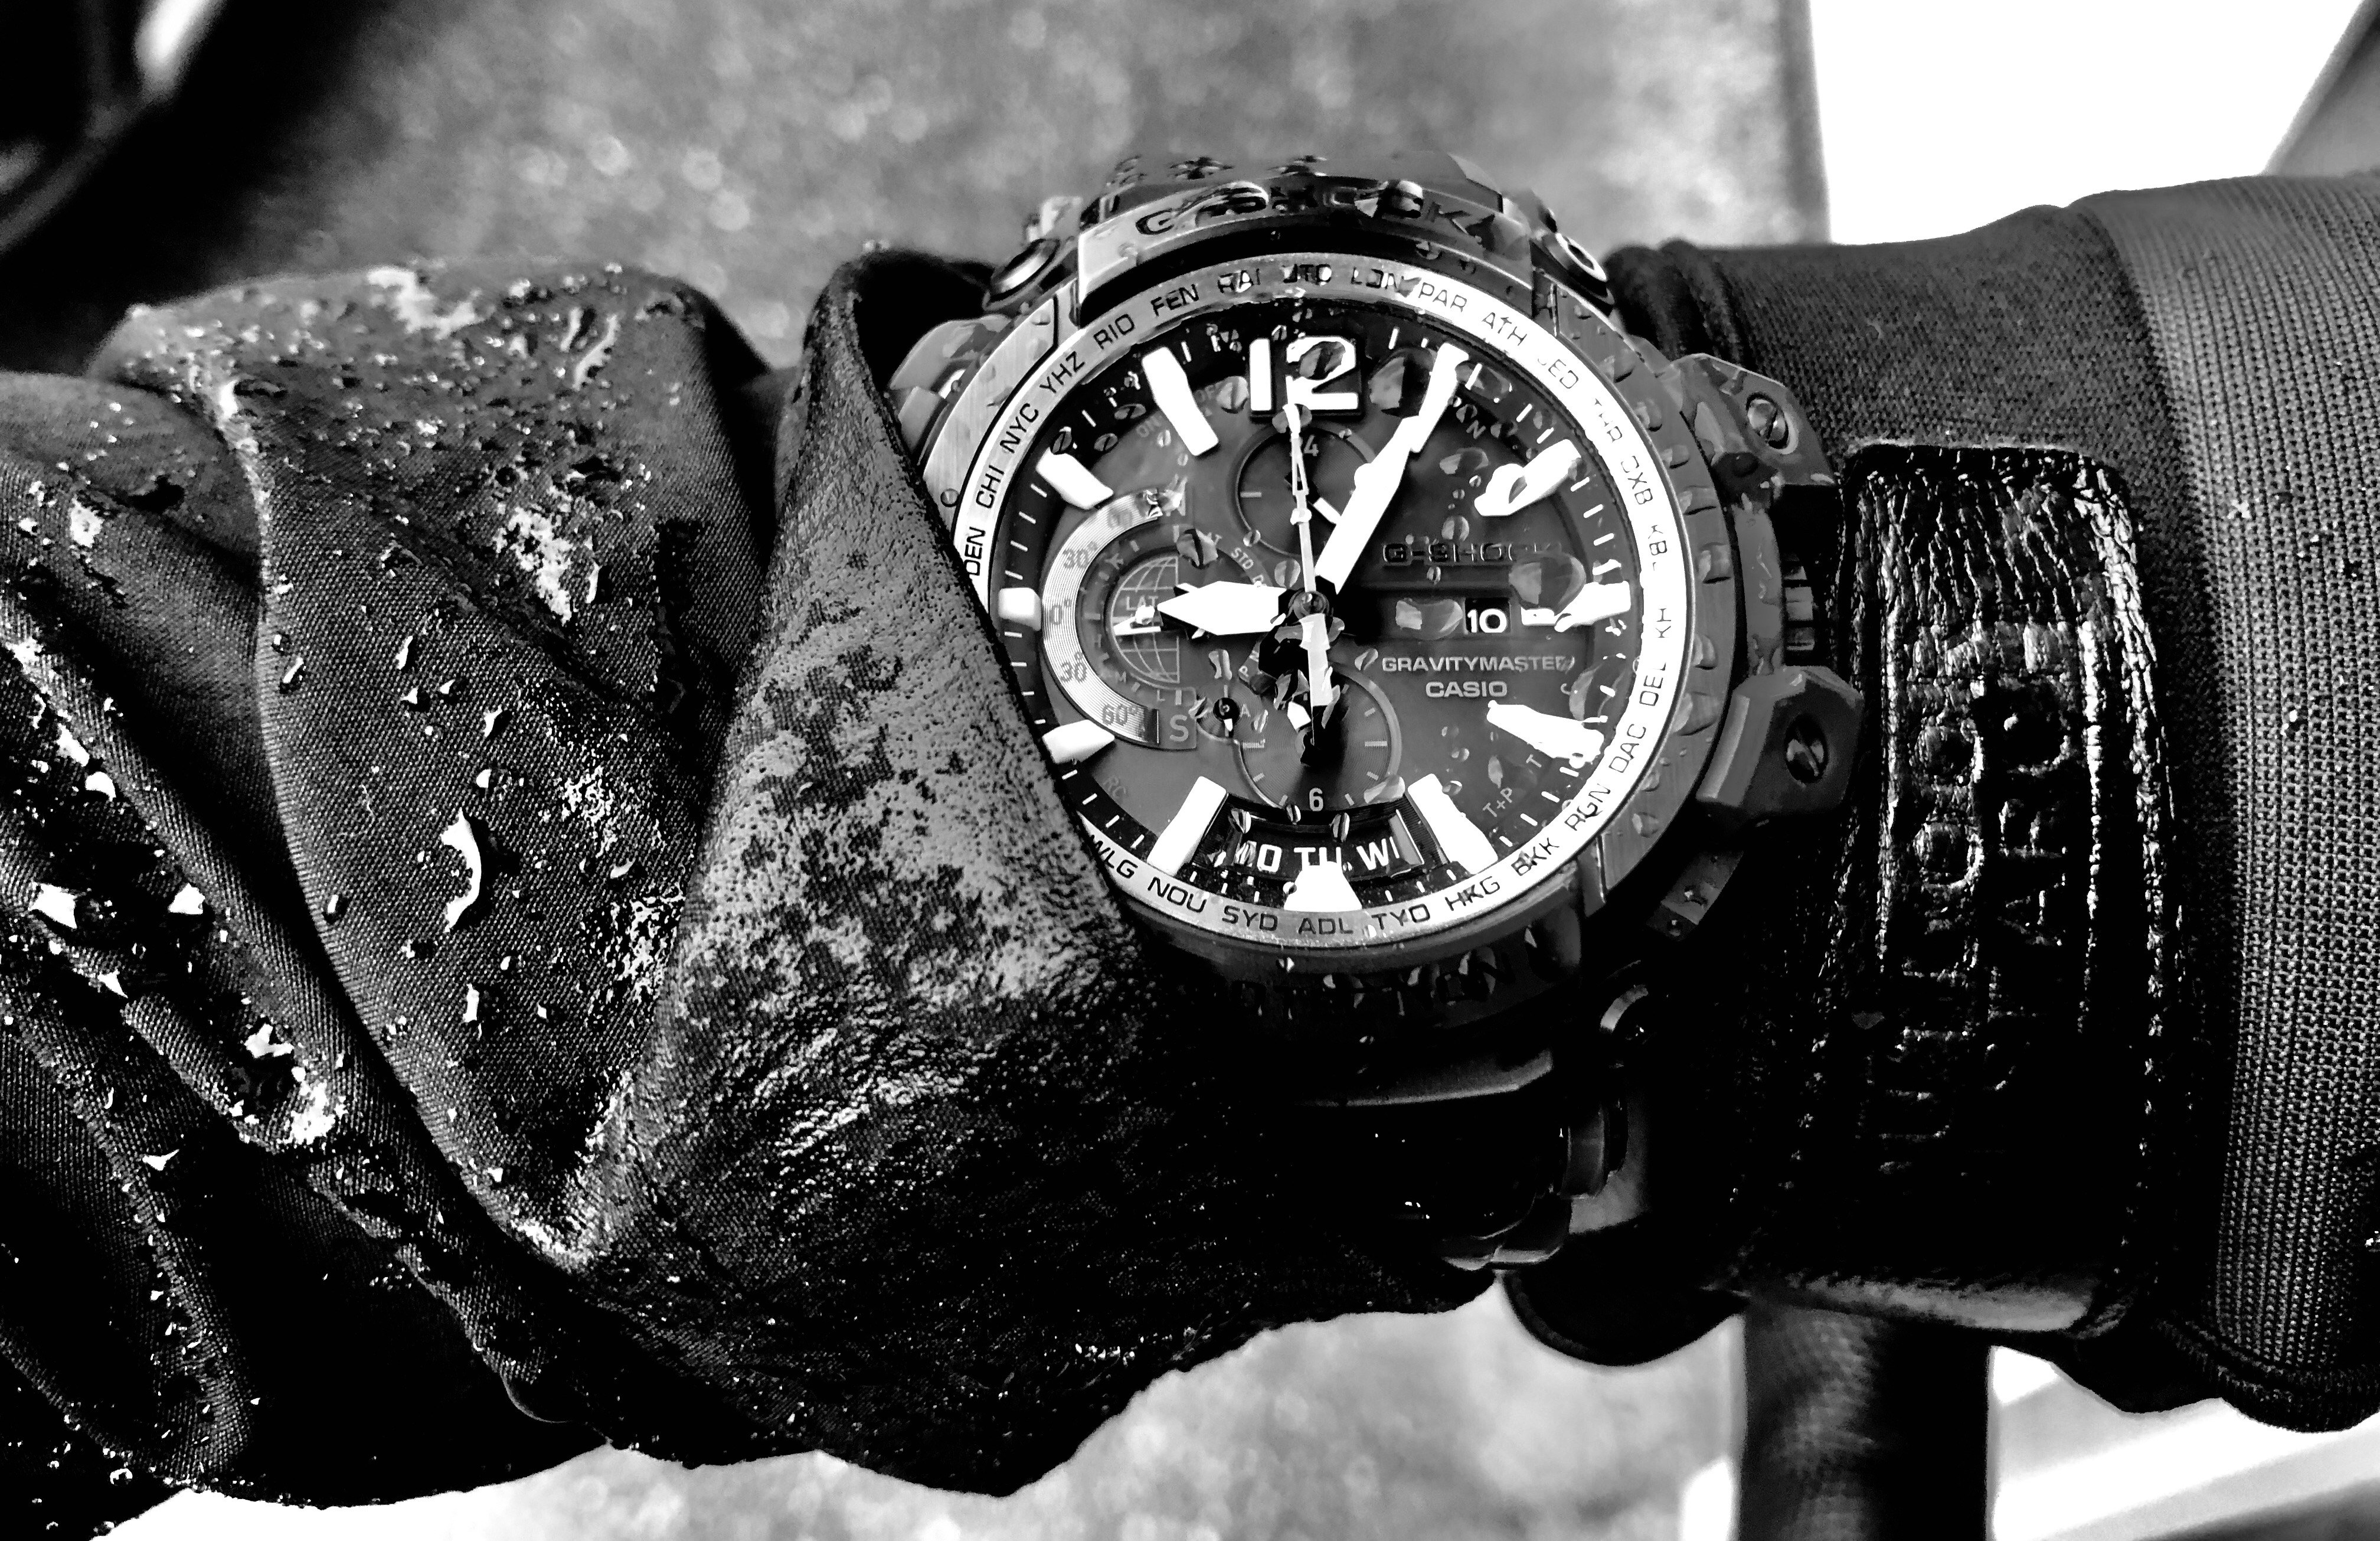 Casio G-SHOCK GPW-2000 'Gravitymaster' – The Brooks Review